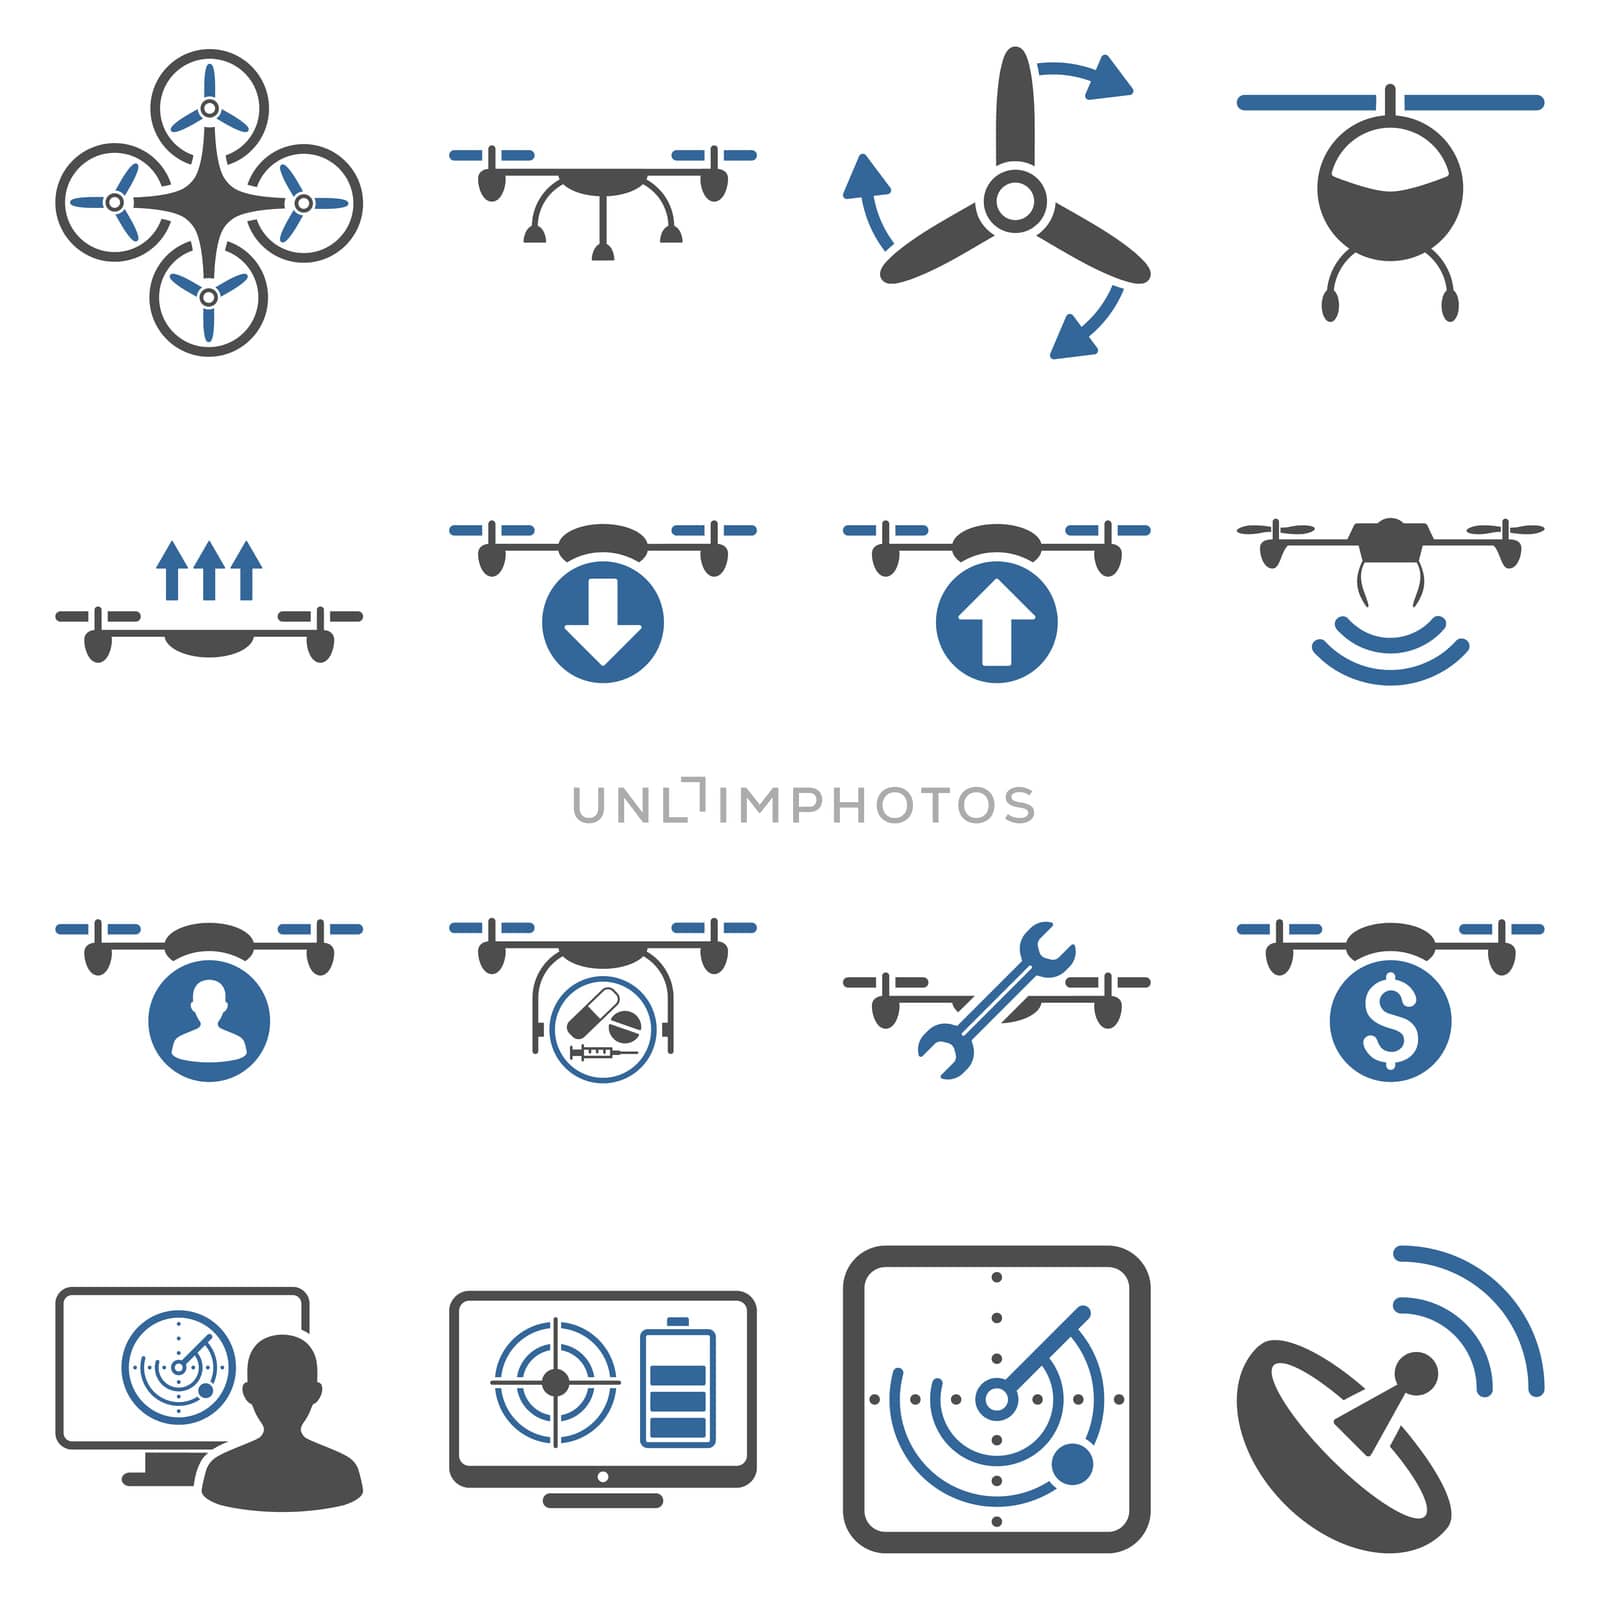 Quadcopter service icon set designed with cobalt and gray colors. These flat bicolor pictograms are isolated on a white background.